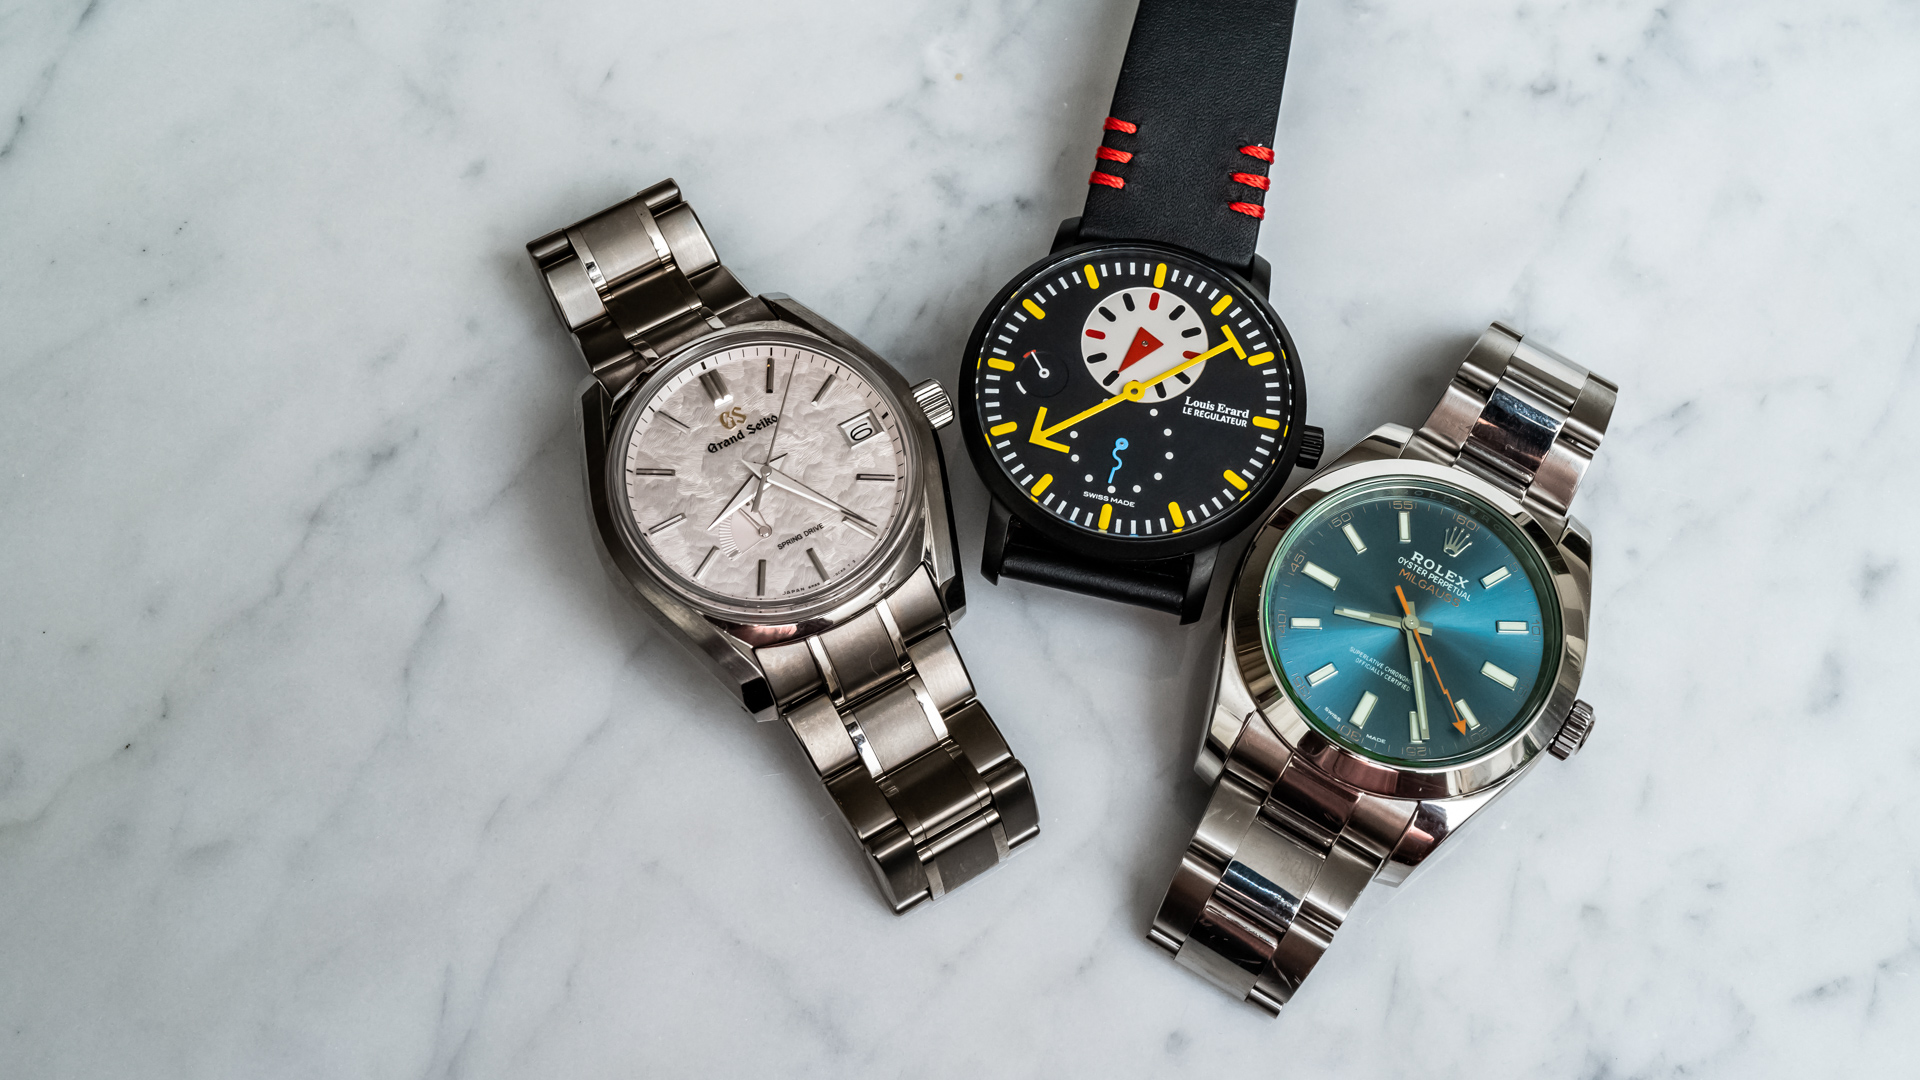 The Watches Team aBlogtoWatch Wore Most In 2020